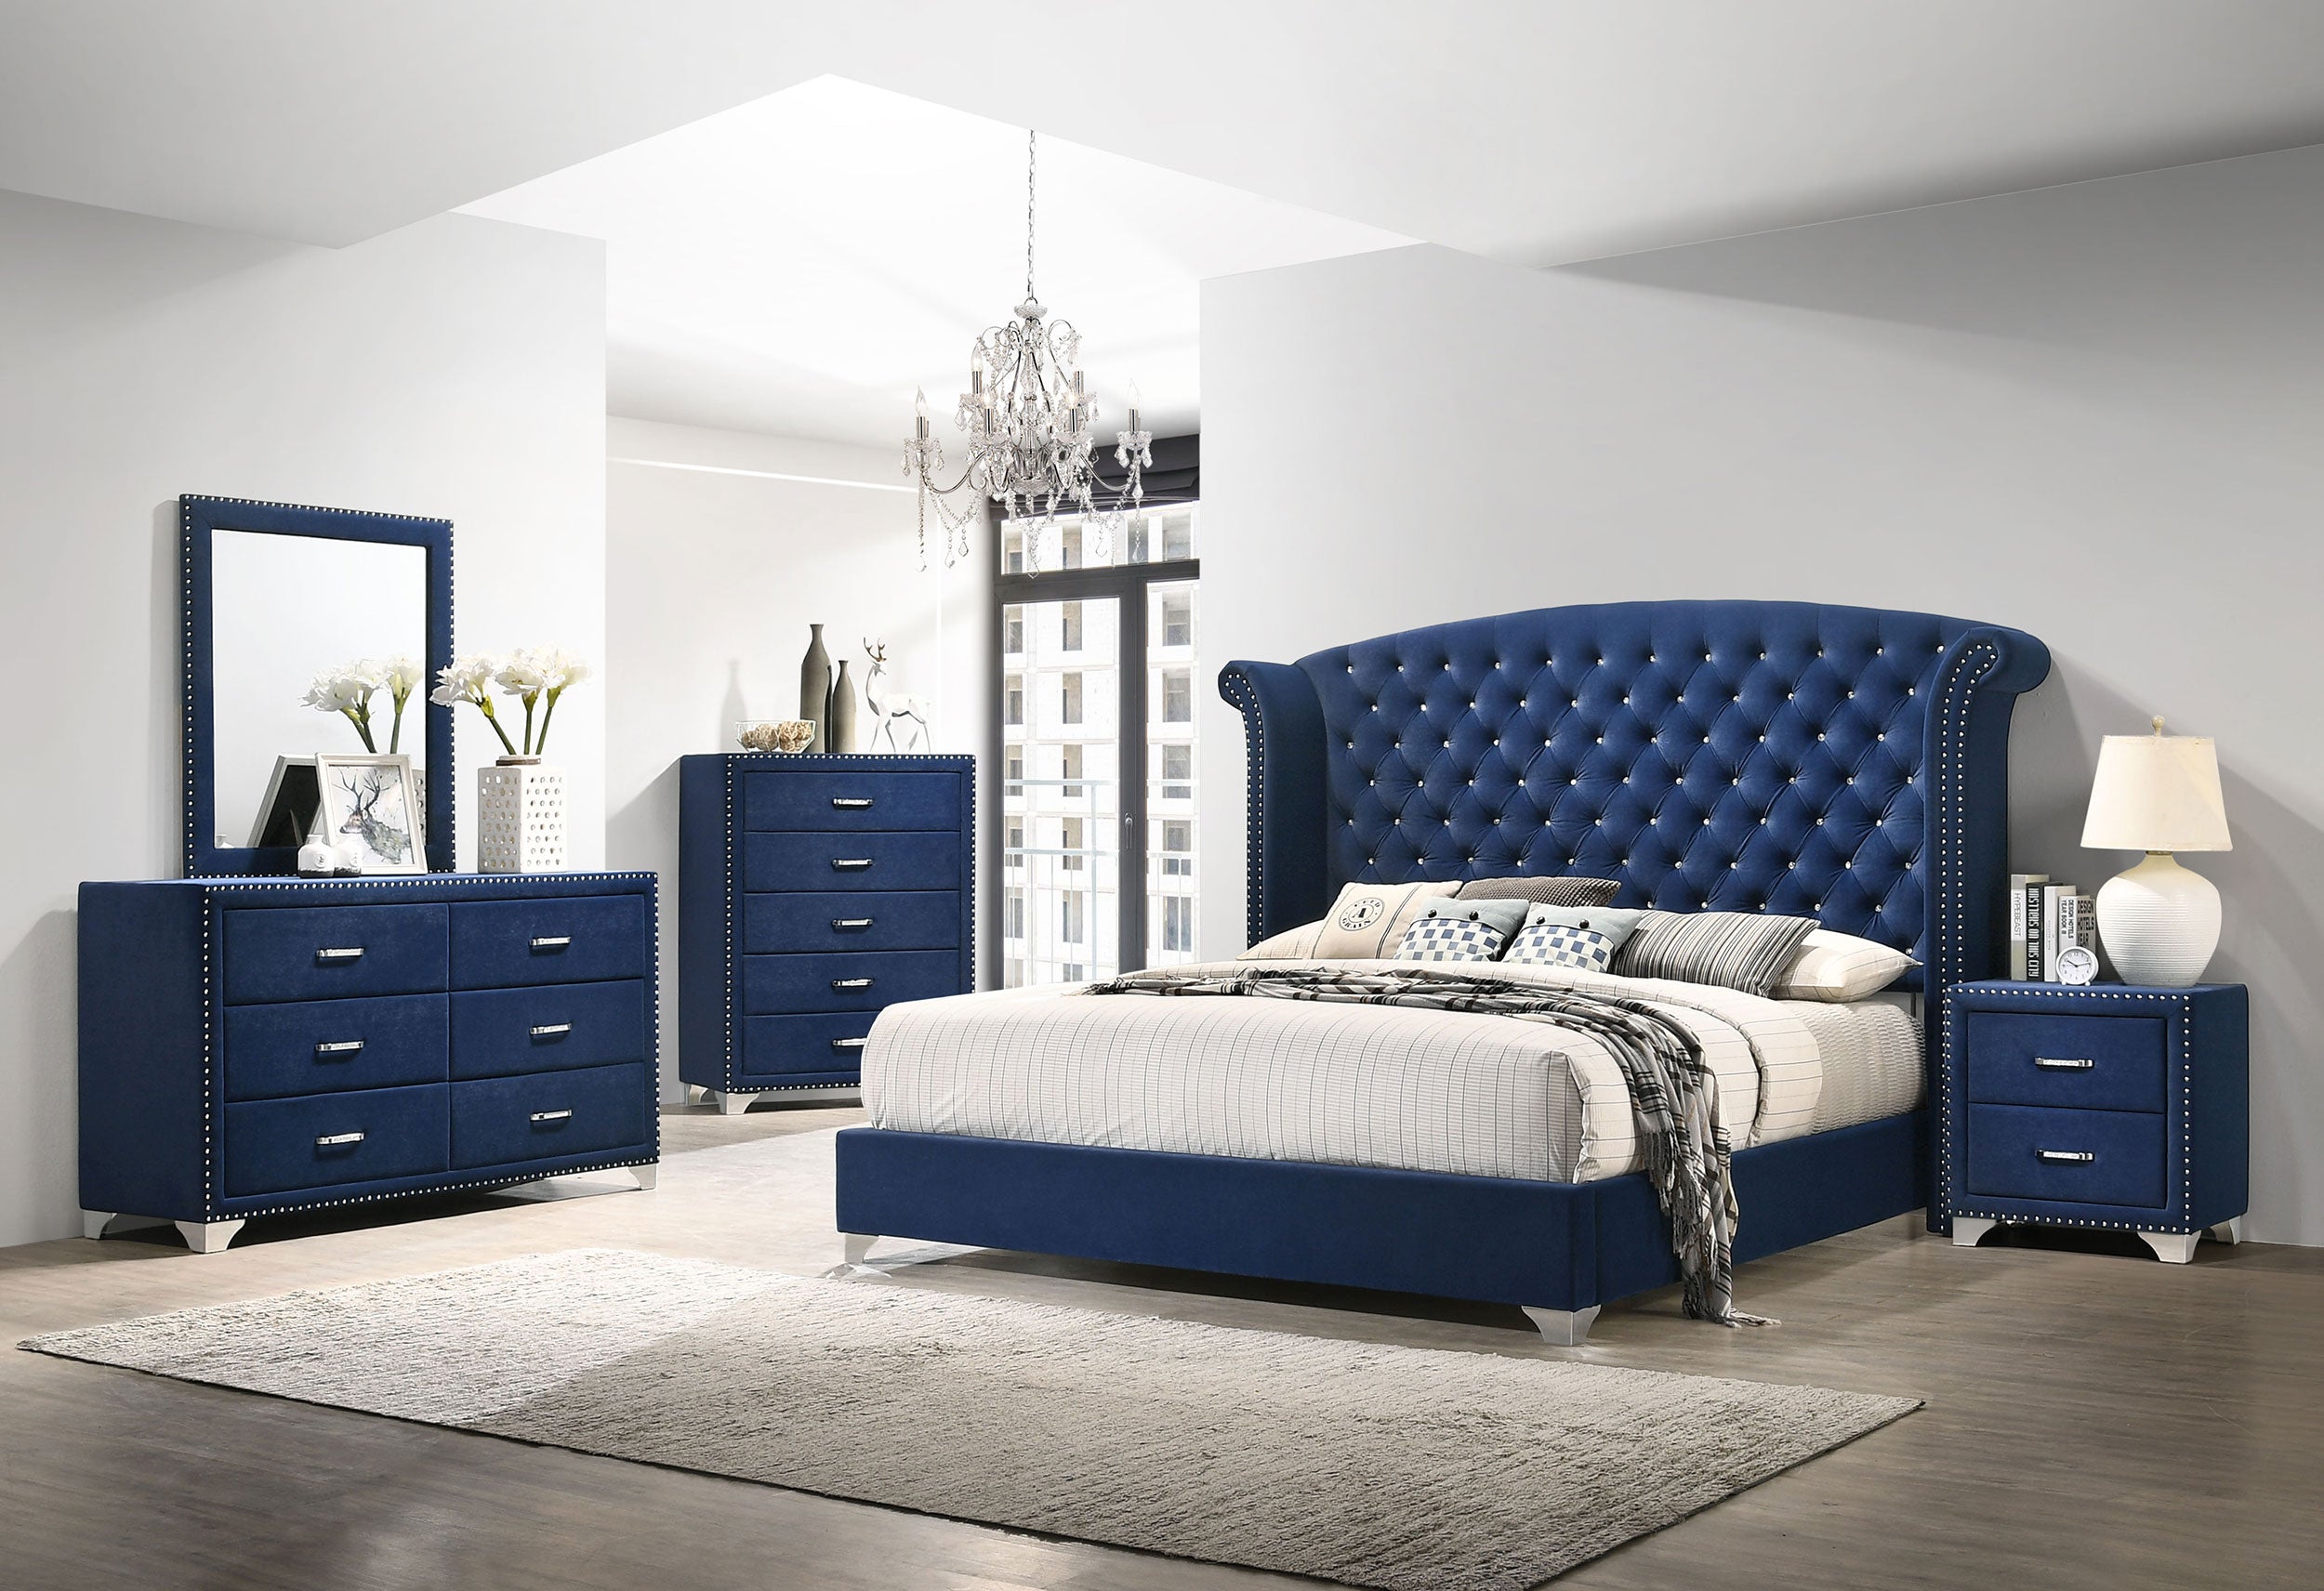 Coaster Melody Tufted Upholstered Bedroom Set Pacific Blue Cal King Set of 5